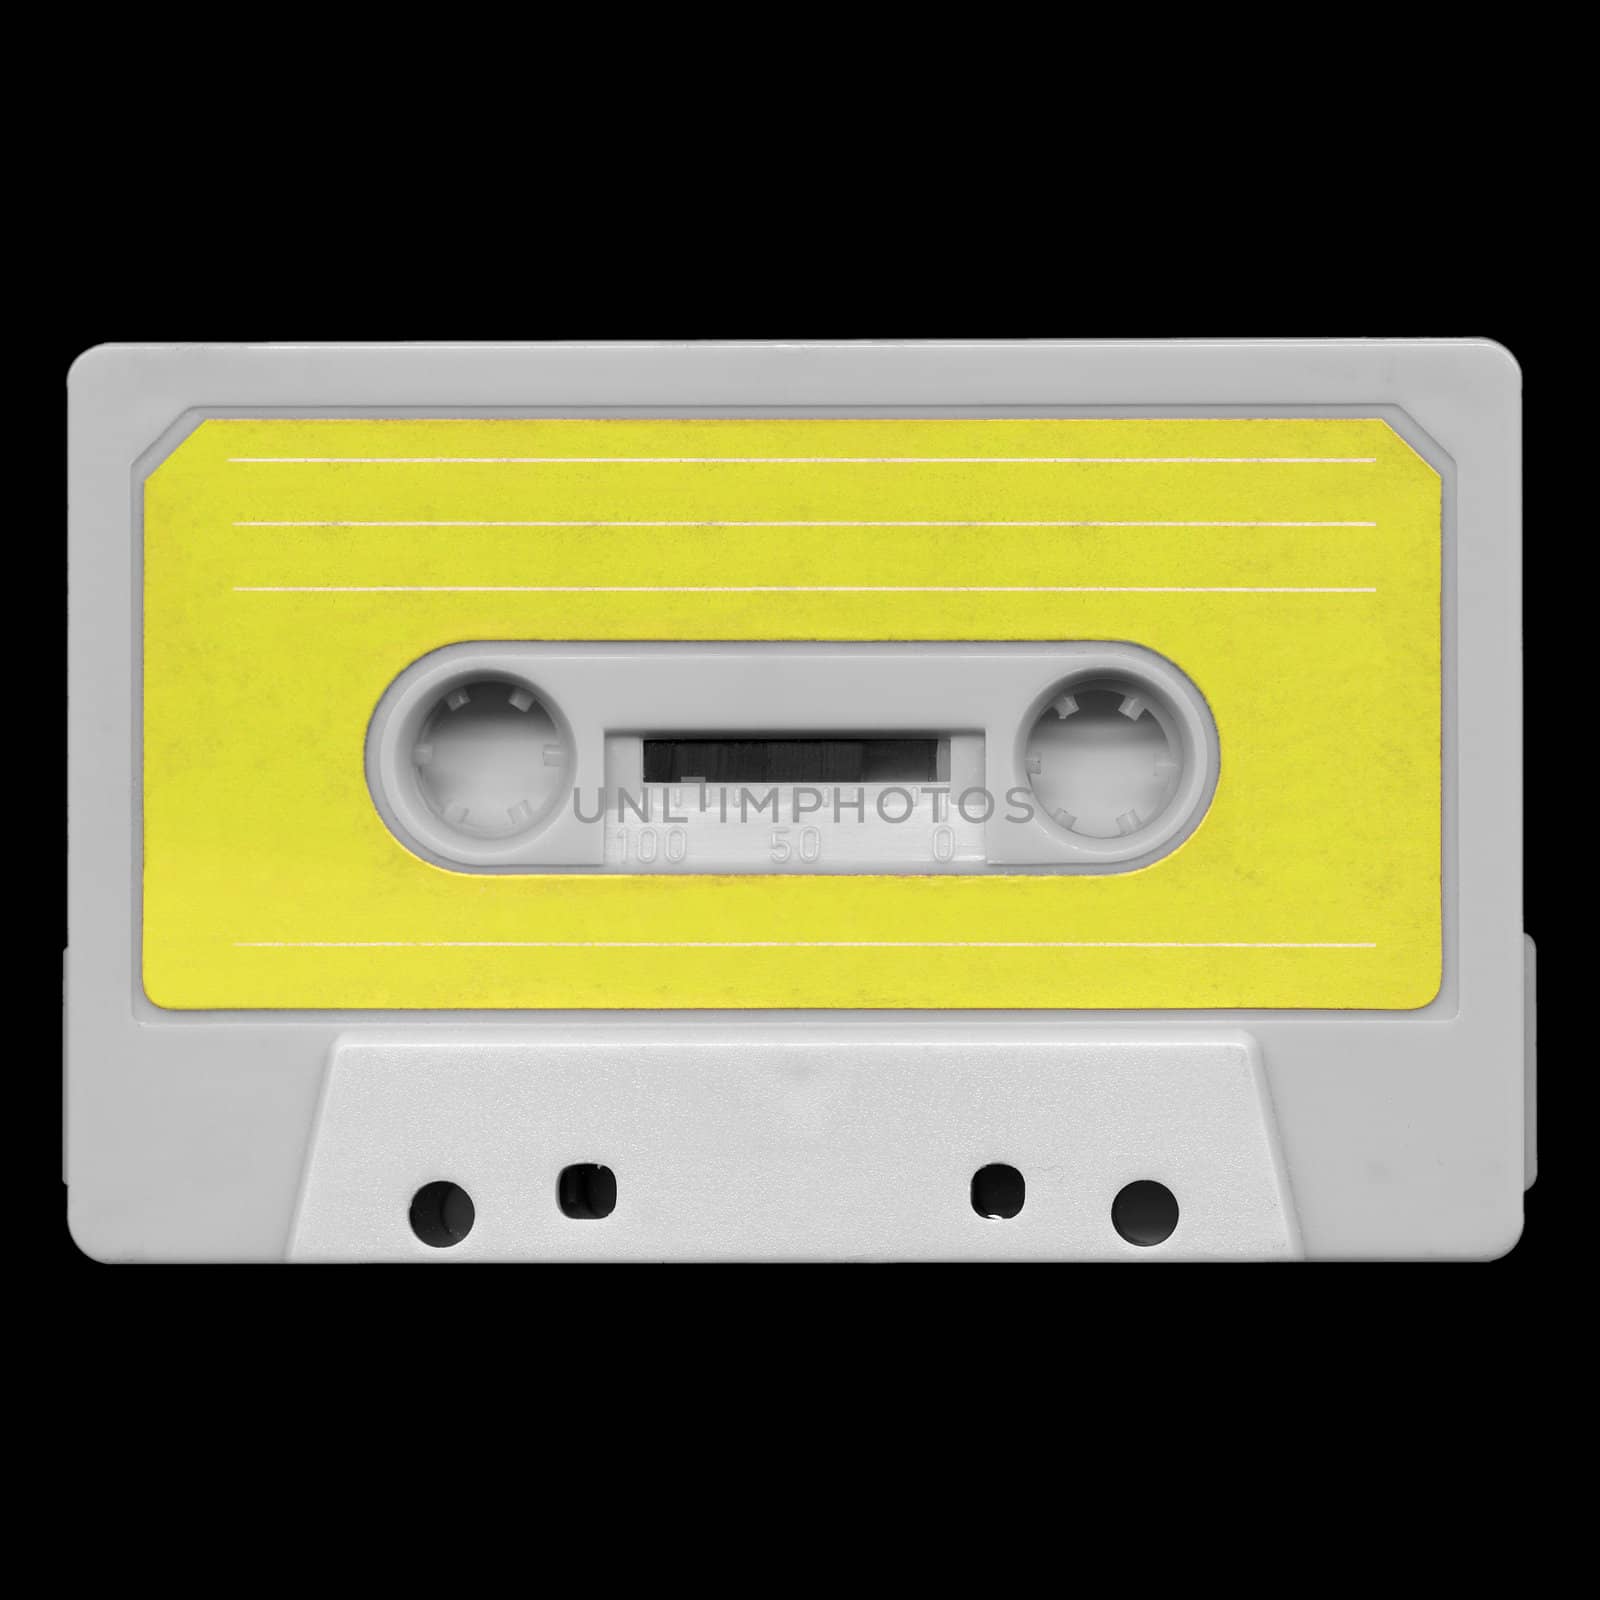 Magnetic tape cassette for audio music recording - isolated over white background